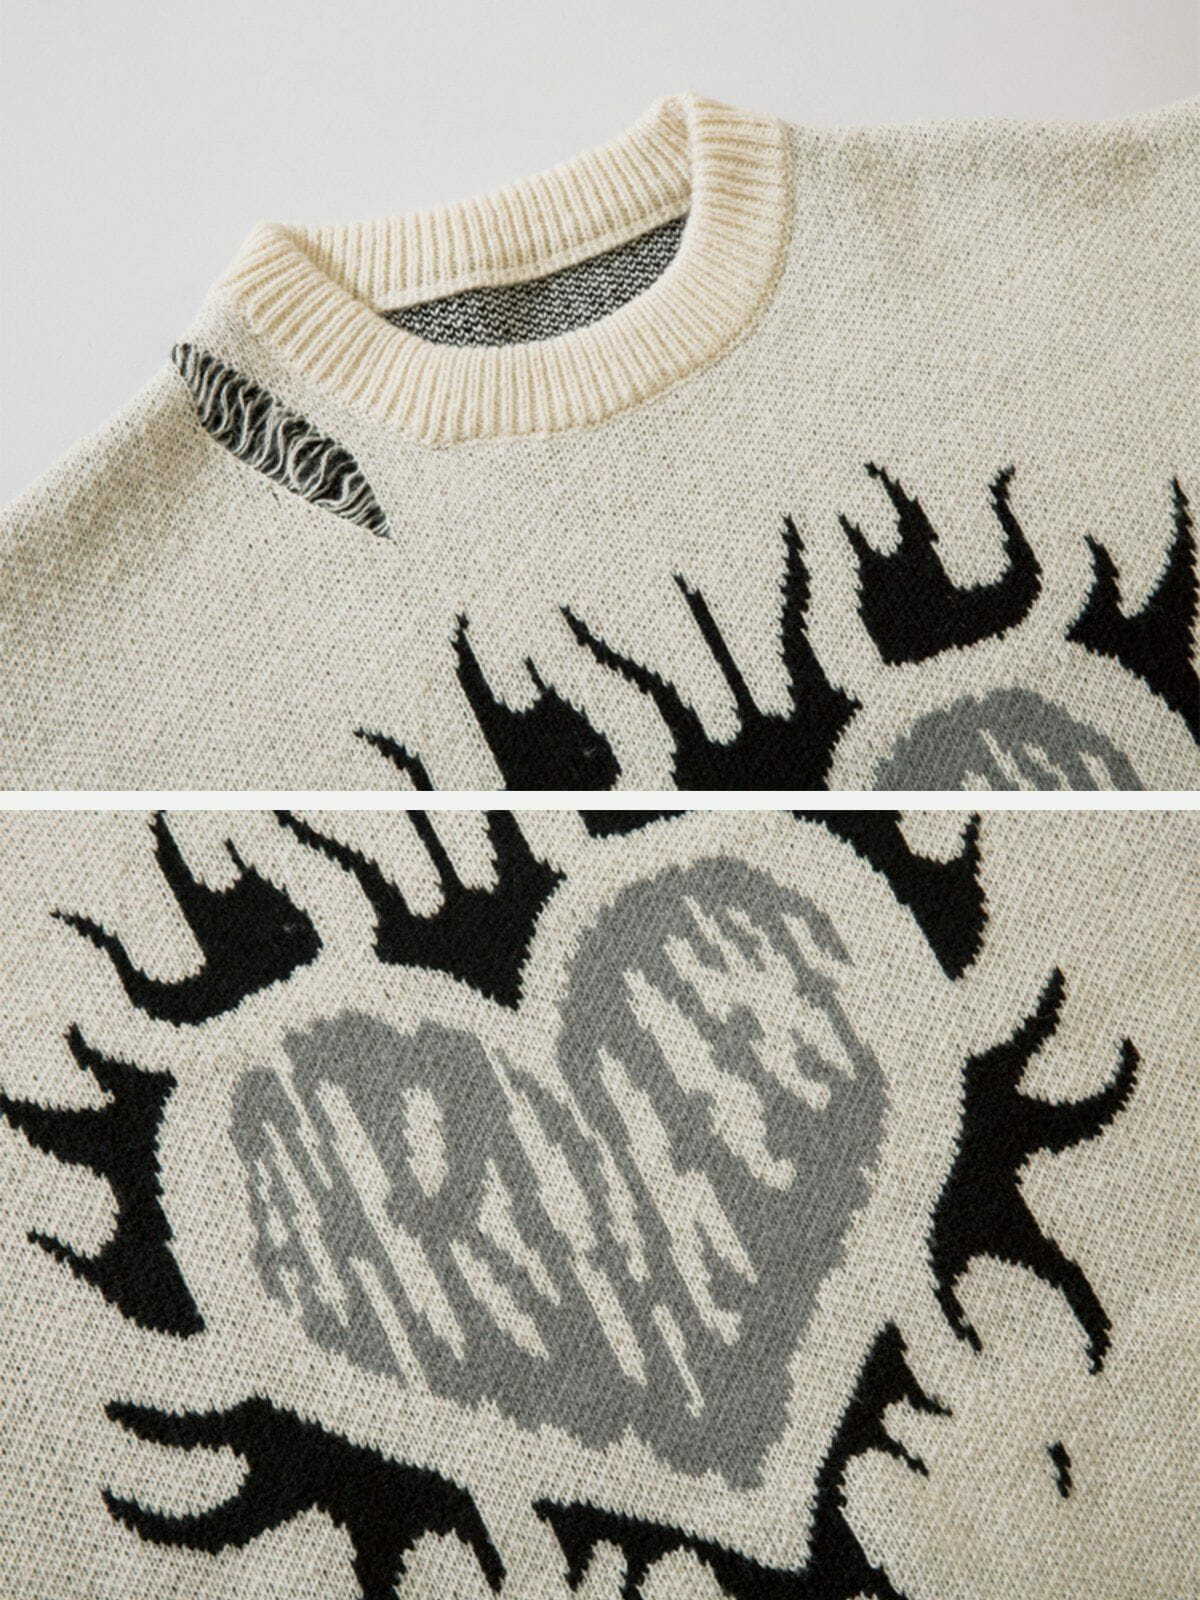 flame heart jacquard sweater edgy retro knitwear chic 6015